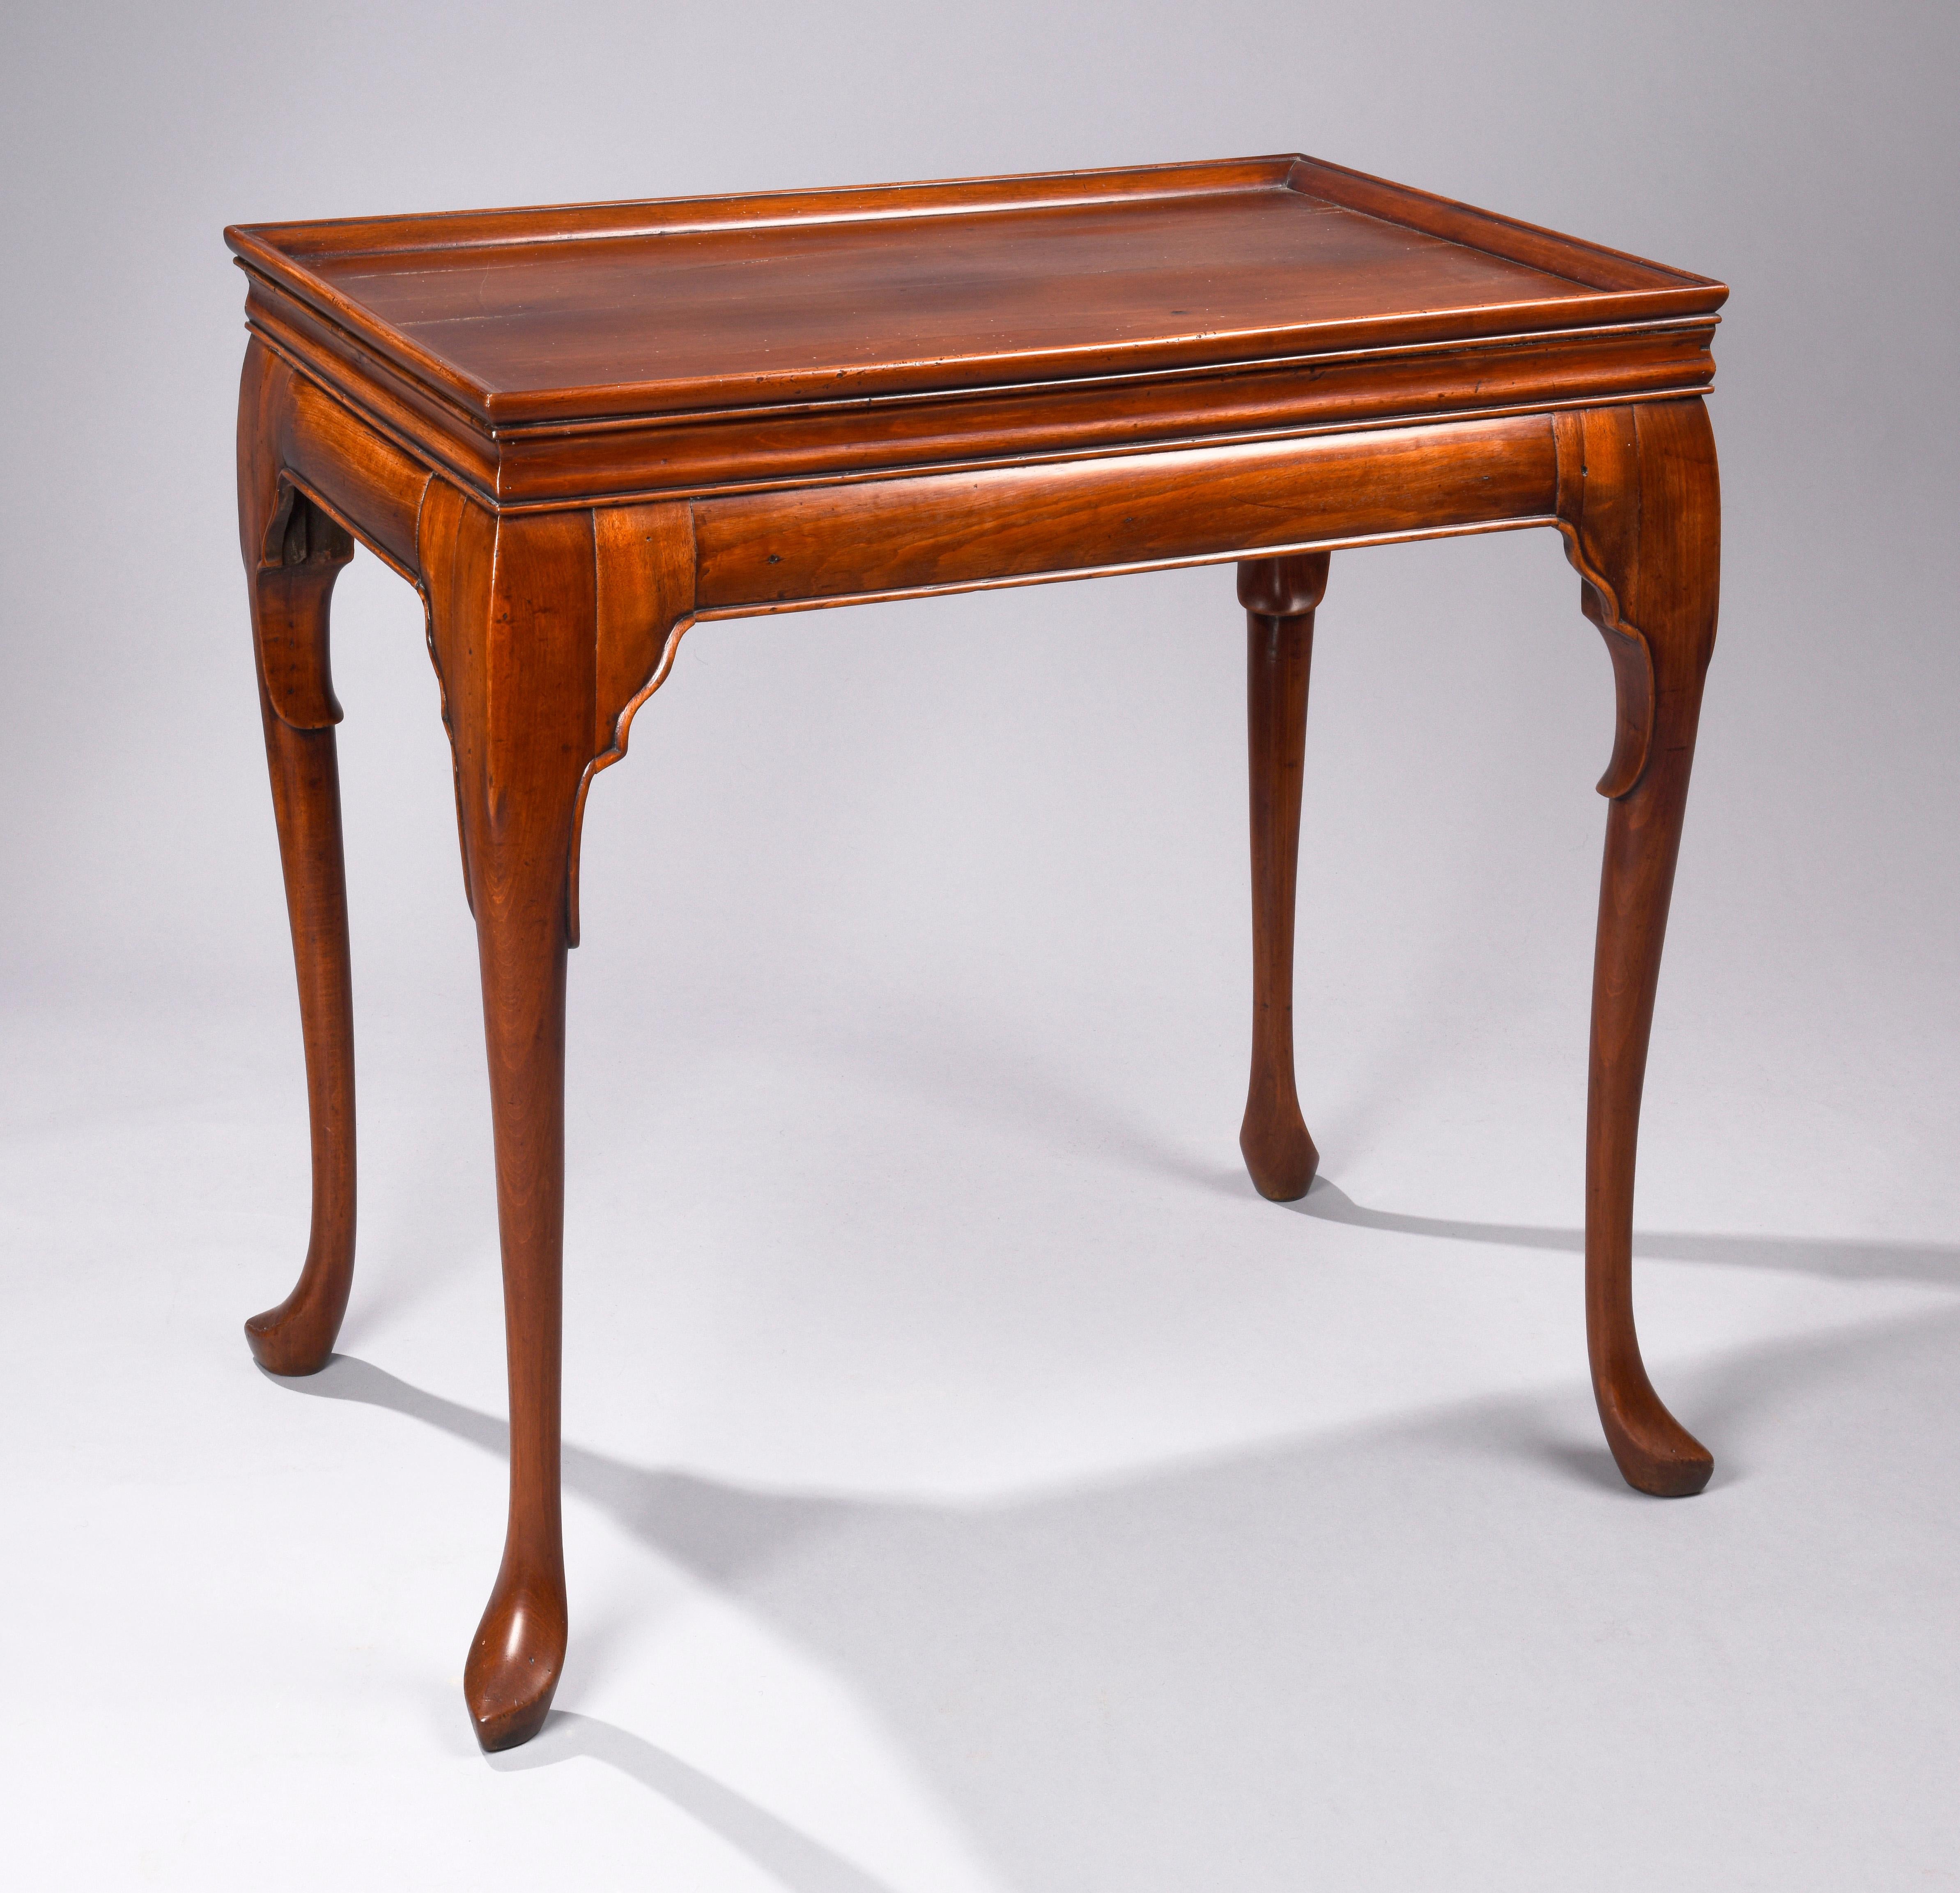 English or Irish tray top tea table with raised molding on the aprons and moving down knees. Finely detailed and bold moldings around the tray. Cabriole legs terminating in slipper feet, circa 1740-1760.